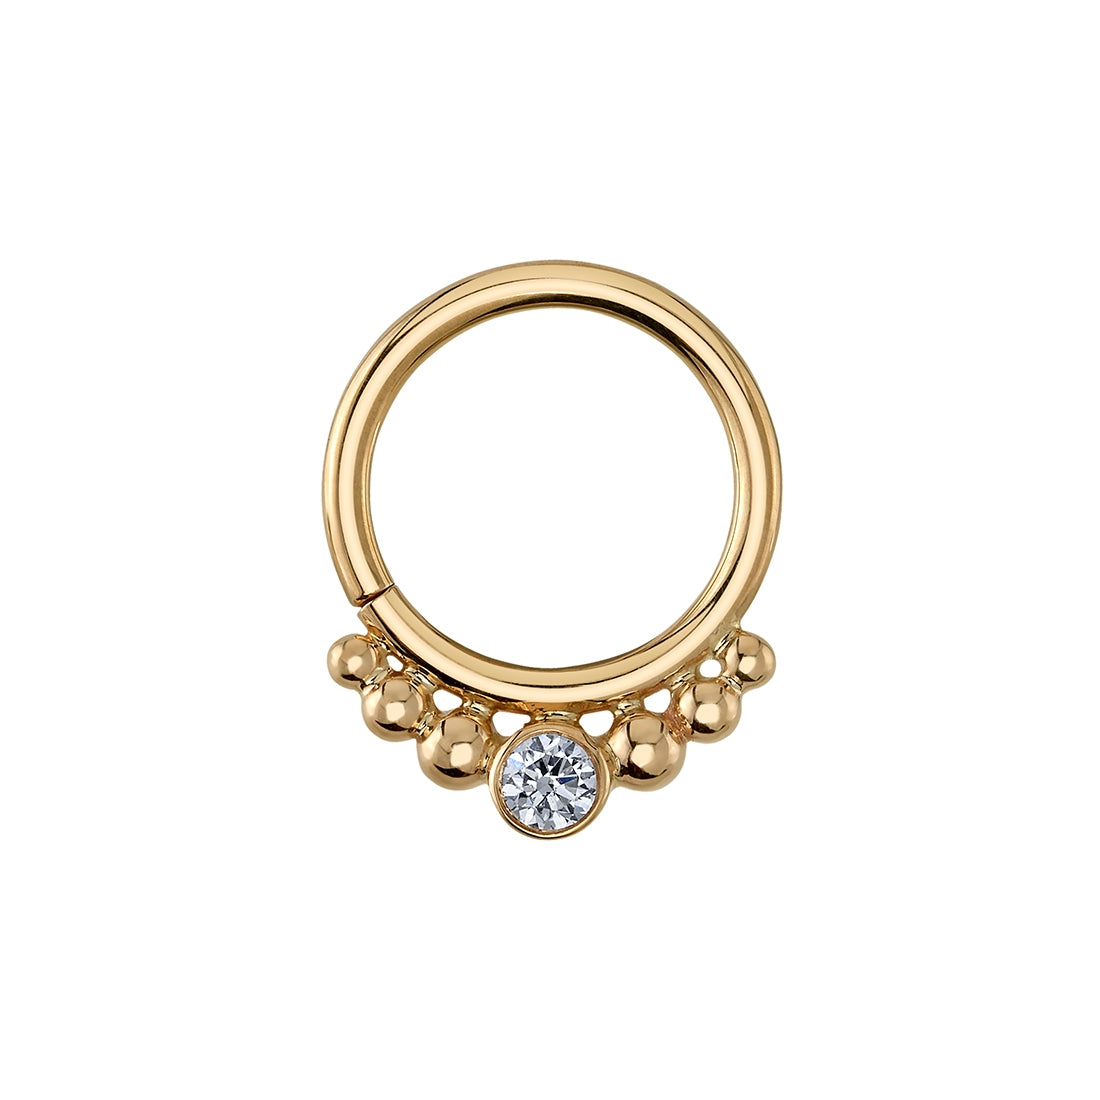 BVLA - DIONE - 14KT SOLID GOLD - SEAM RING